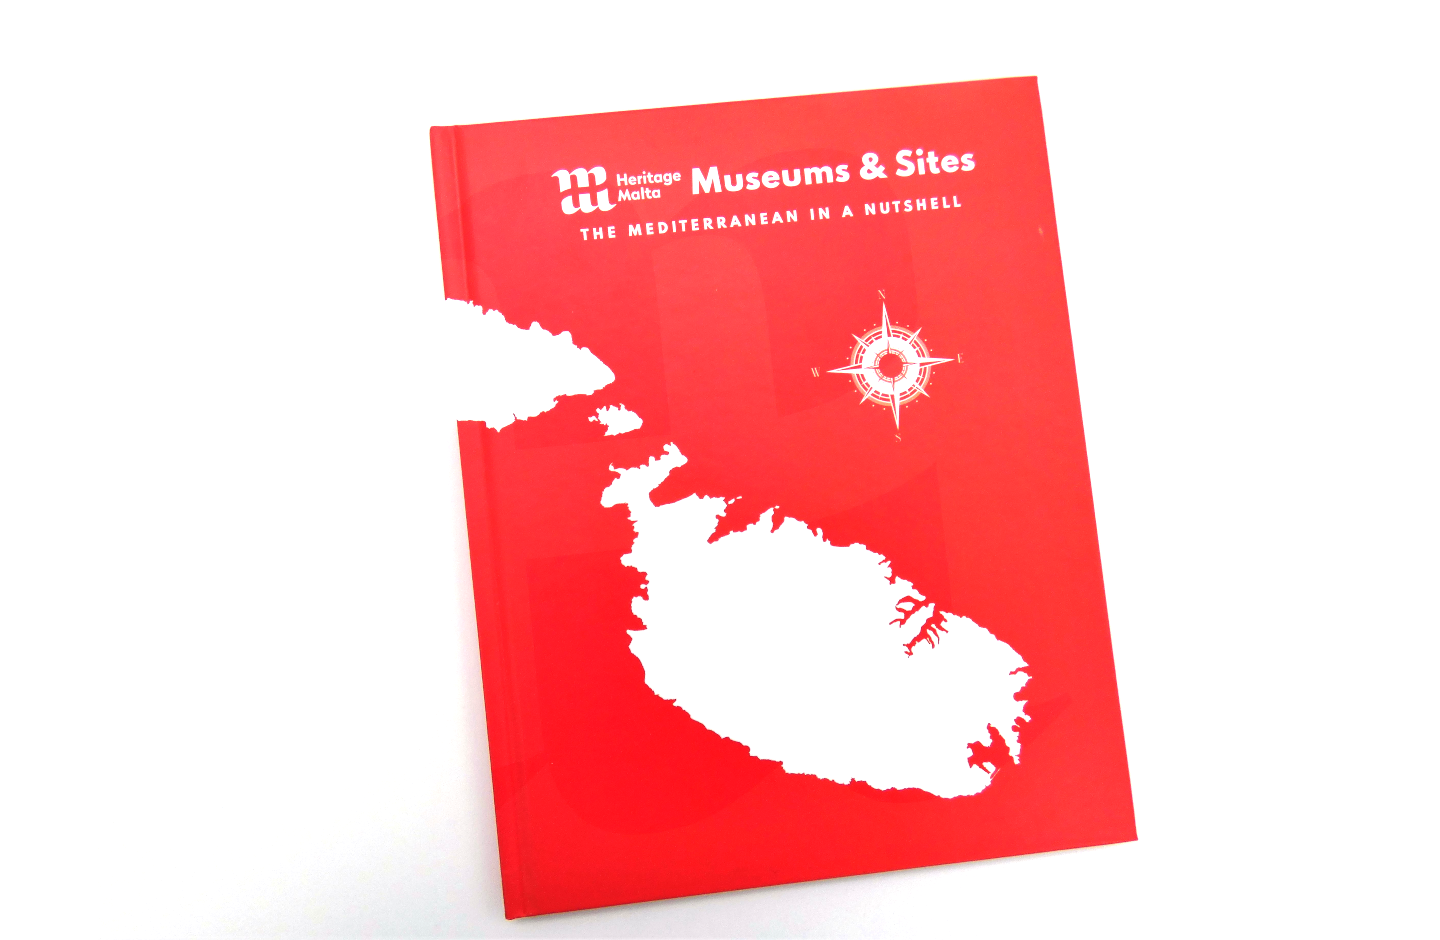 Museums & Sites: The Mediterranean in a nutshell – 2nd Edition